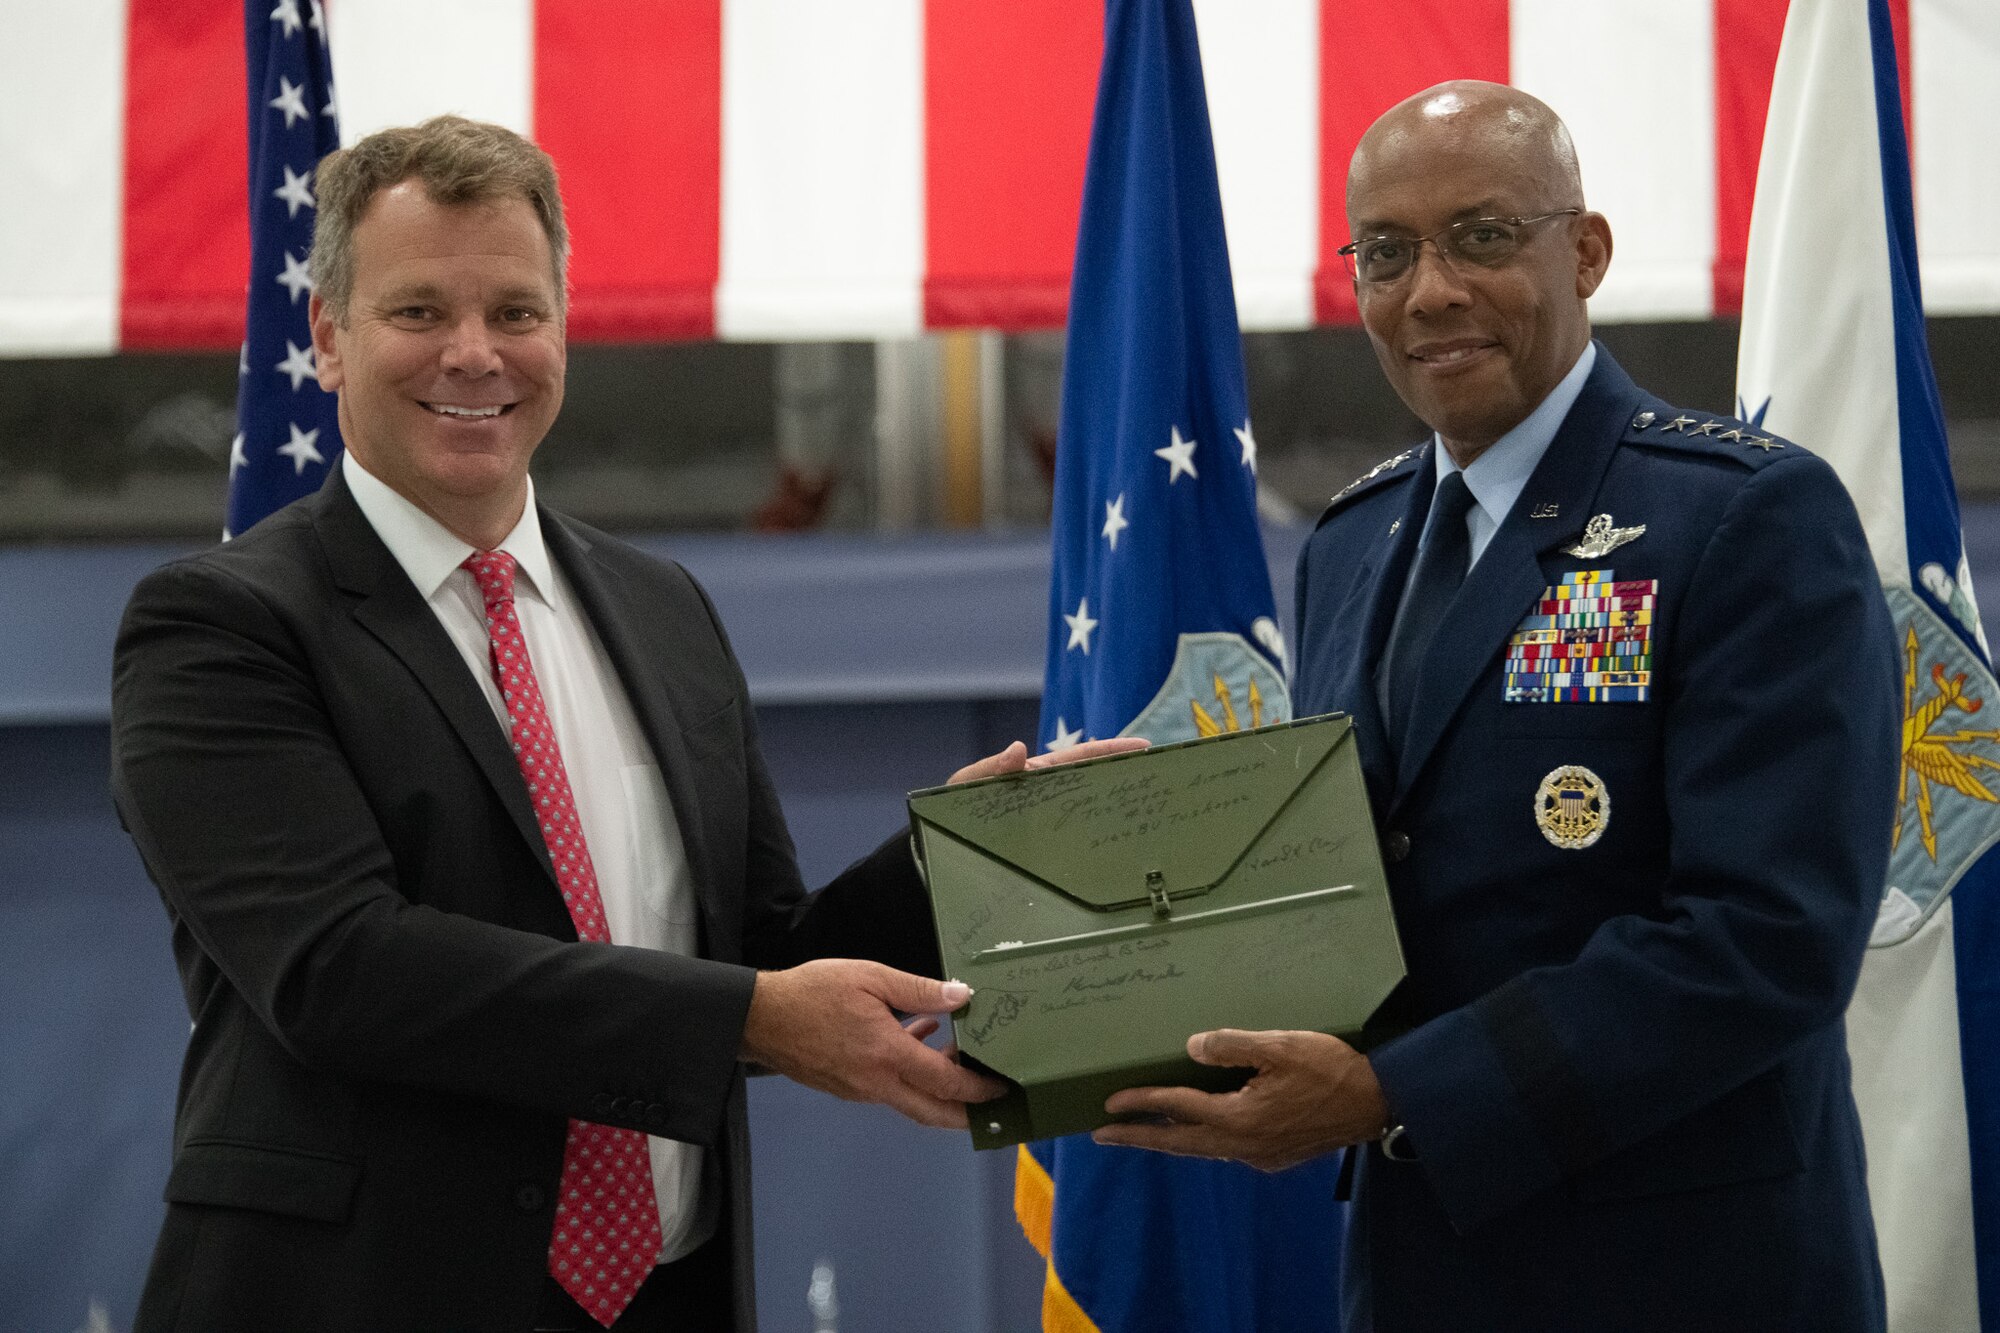 Rob Collings, Collings Foundation’s executive director, and U.S. Air Force Chief of Staff Gen. CQ Brown, Jr., exchange a map signed by the Tuskegee Airmen during the PT-17 Stearman Aircraft Exchange ceremony at Joint Base Andrews, Md., July 26, 2023. Brown became an honorary Tuskegee Airman in August 2021. (U.S. Air Force photo by Senior Airman Tyrone Thomas)